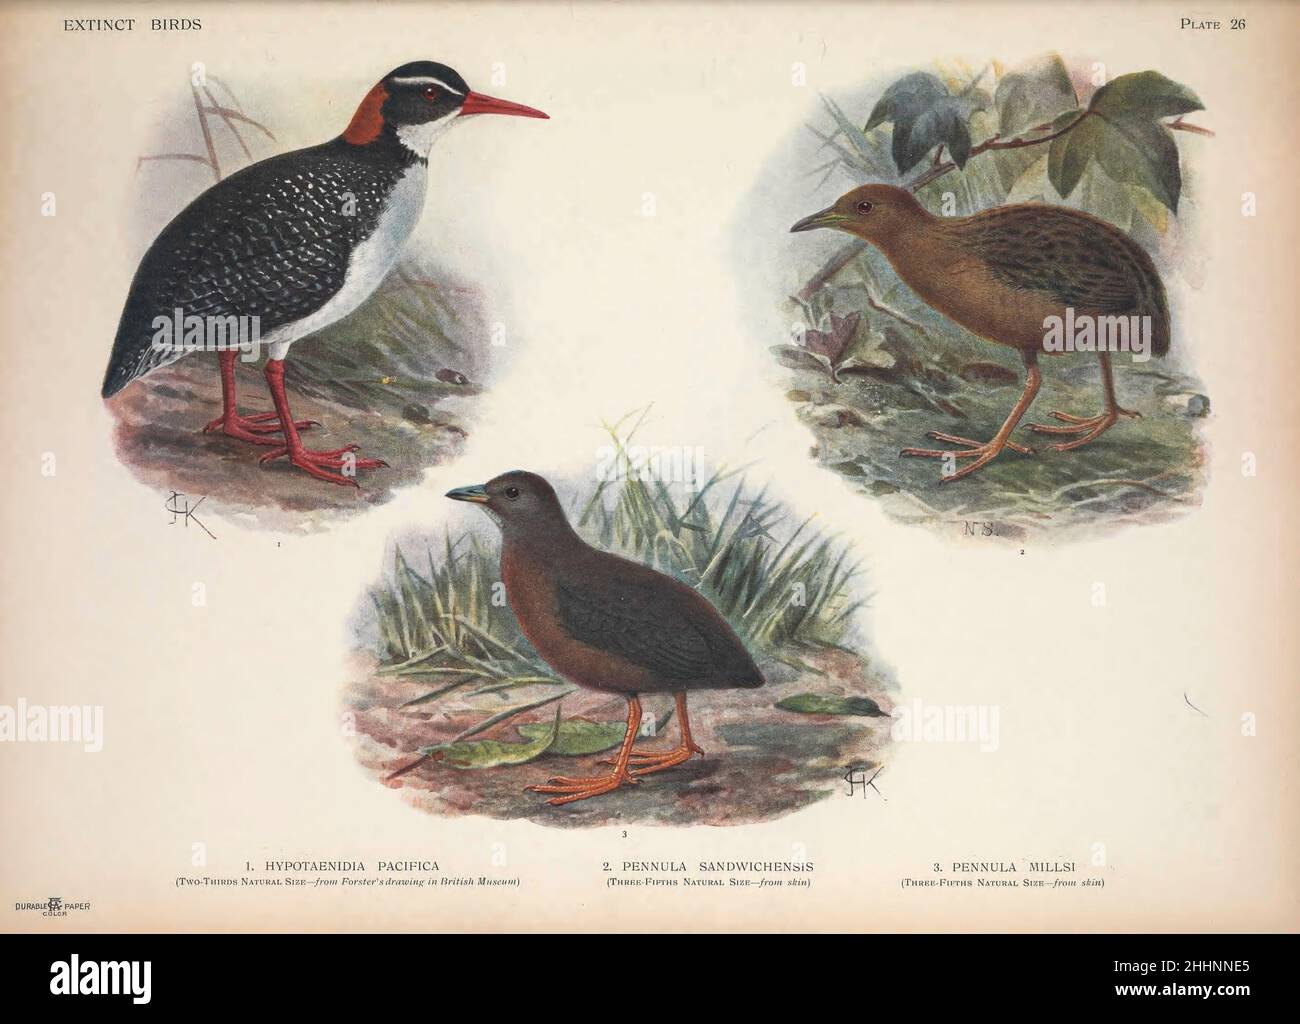 1. The Tahiti rail, Tahitian red-billed rail, or Pacific red-billed rail (Hypotaenidia pacifica). 2. The Hawaiian rail (Zapornia sandwichensis here as Pennula sandwichensis), Hawaiian spotted rail, or Hawaiian crake is an extinct species of diminutive rail that lived on Big Island of Hawaiʻi. 3.  The Hawaiian rail (here as Pennula millsi) from ' Extinct birds ' : an attempt to unite in one volume a short account of those birds which have become extinct in historical times : that is, within the last six or seven hundred years : to which are added a few which still exist, but are on the verge of Stock Photo